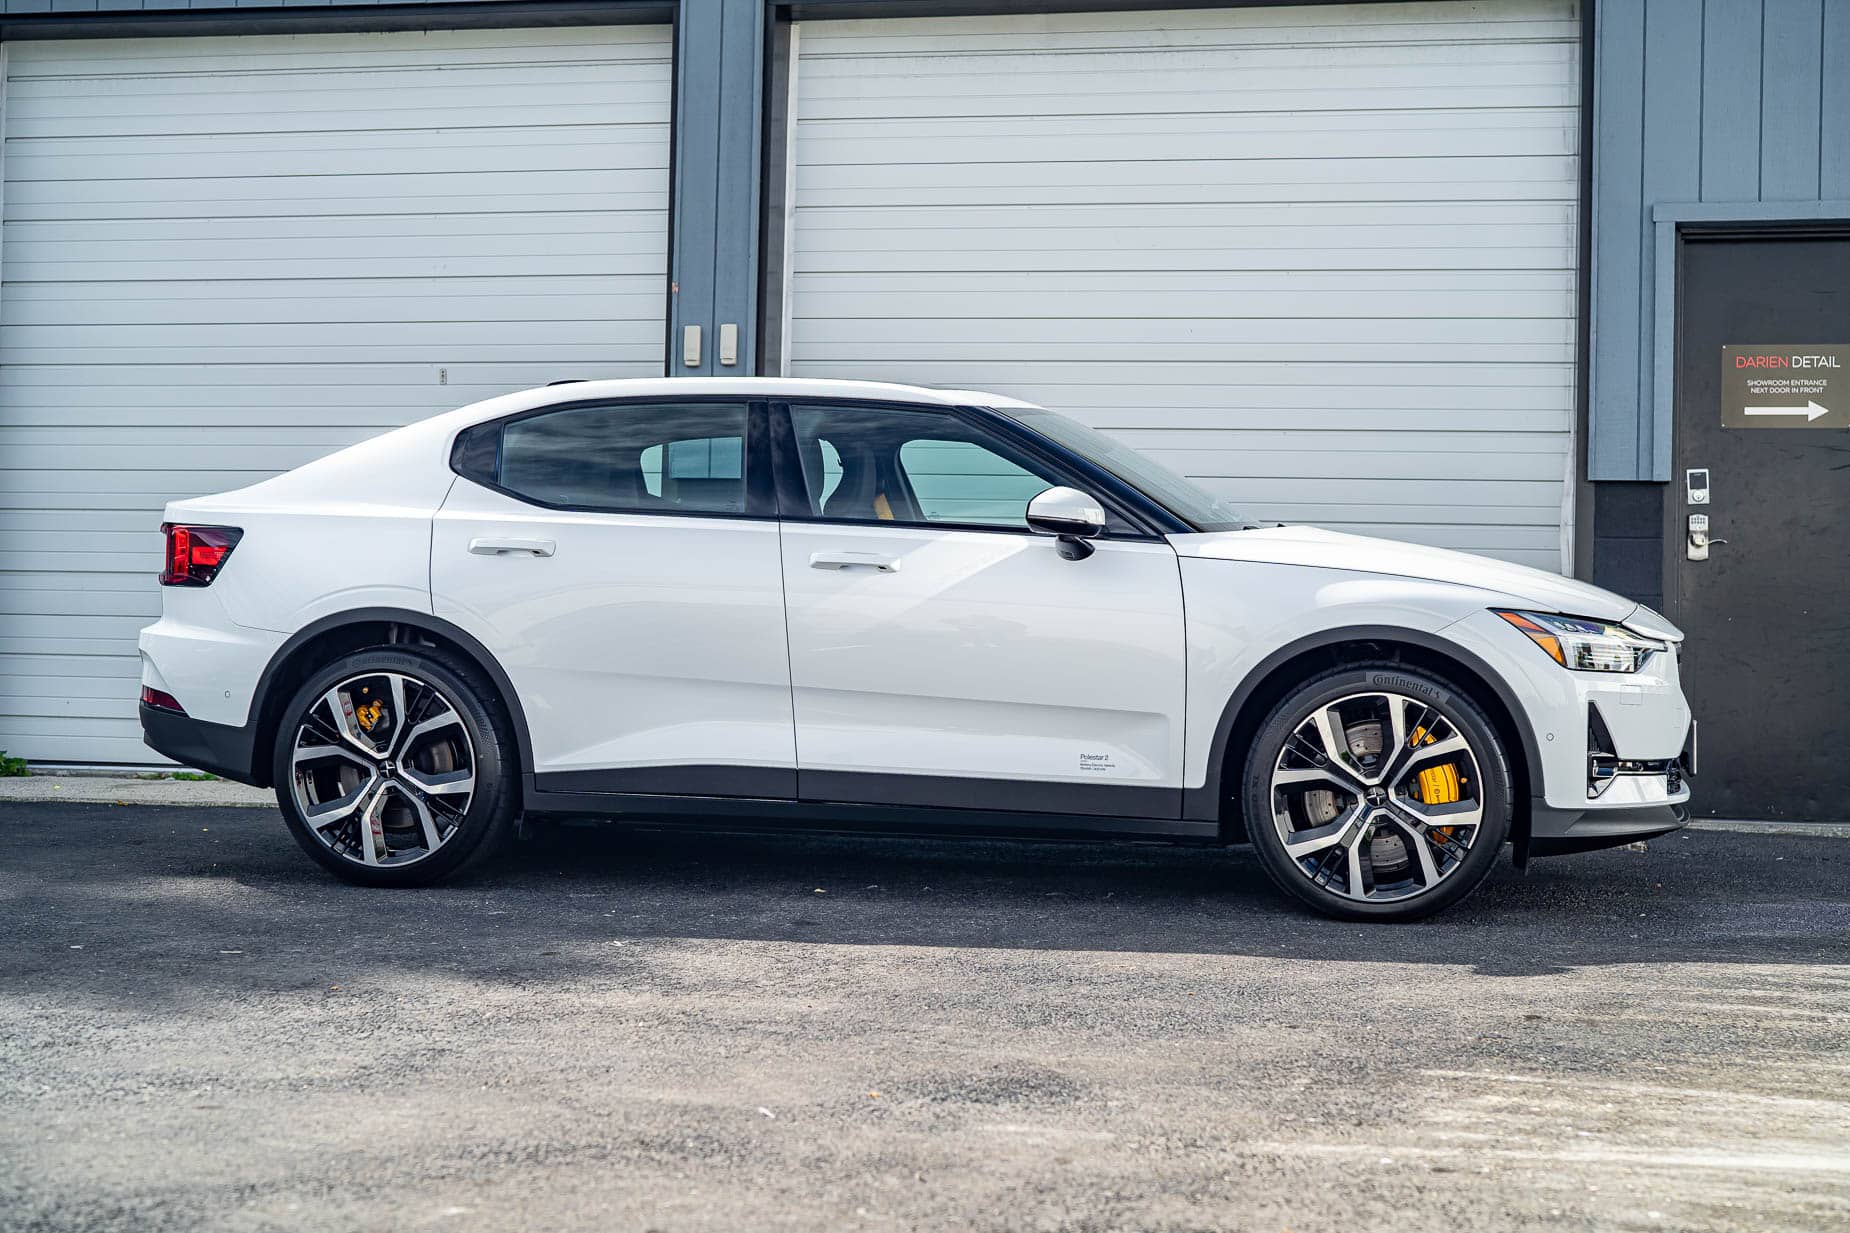 2021 Polestar Two White Xpel Paint Protection Film Ppf Ceramic Coating 5